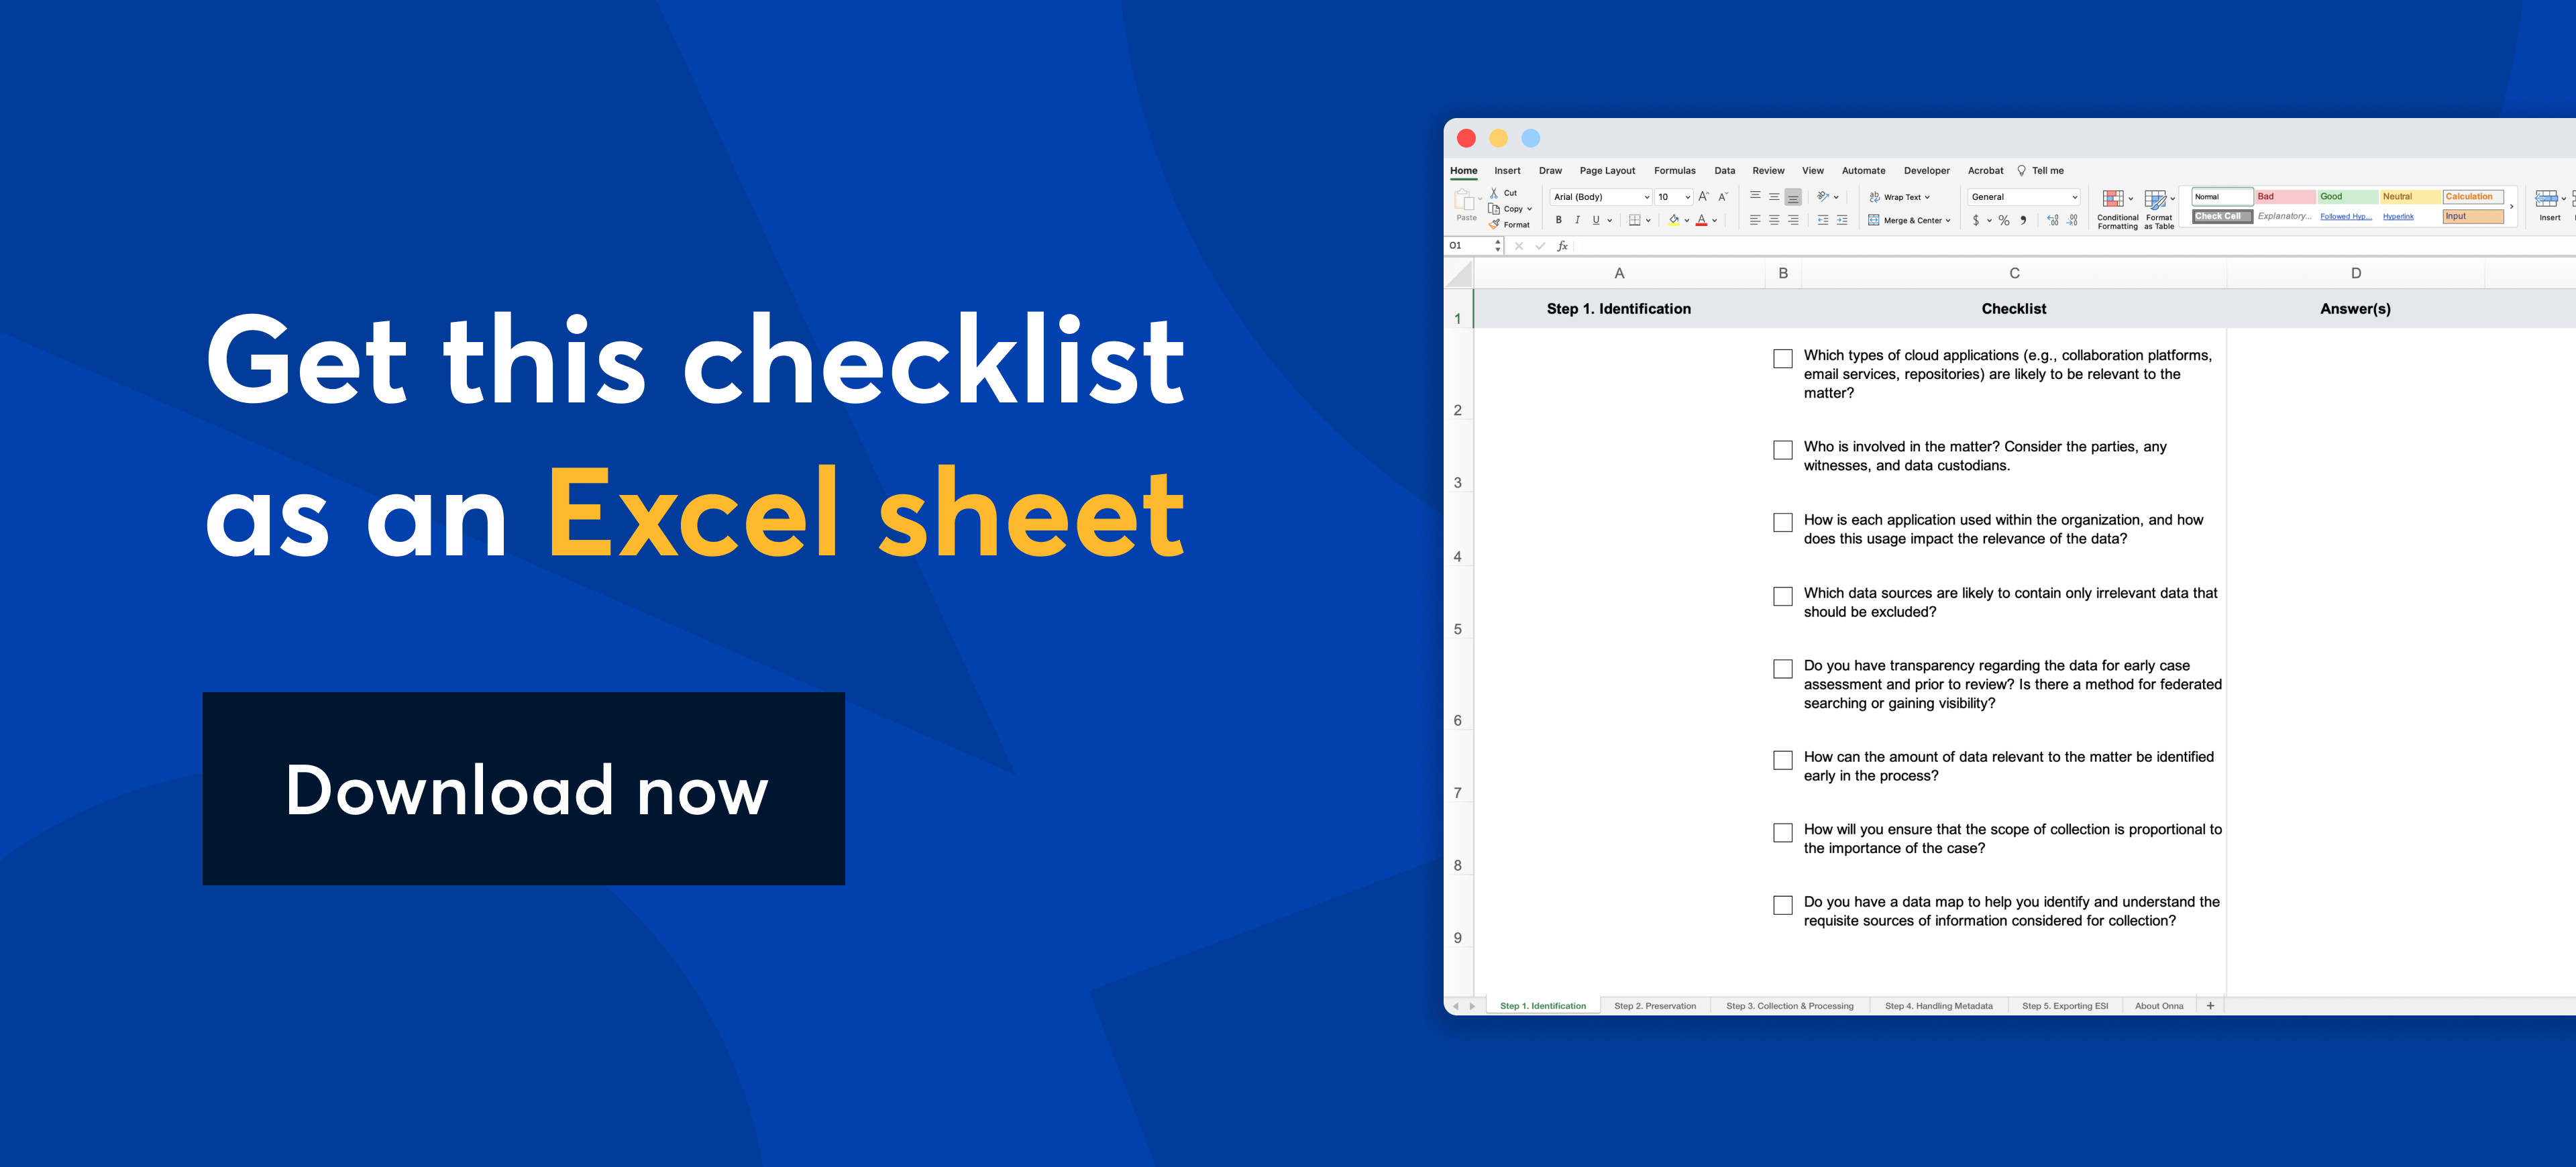 Get this checklist as an Excel sheet. Download now.